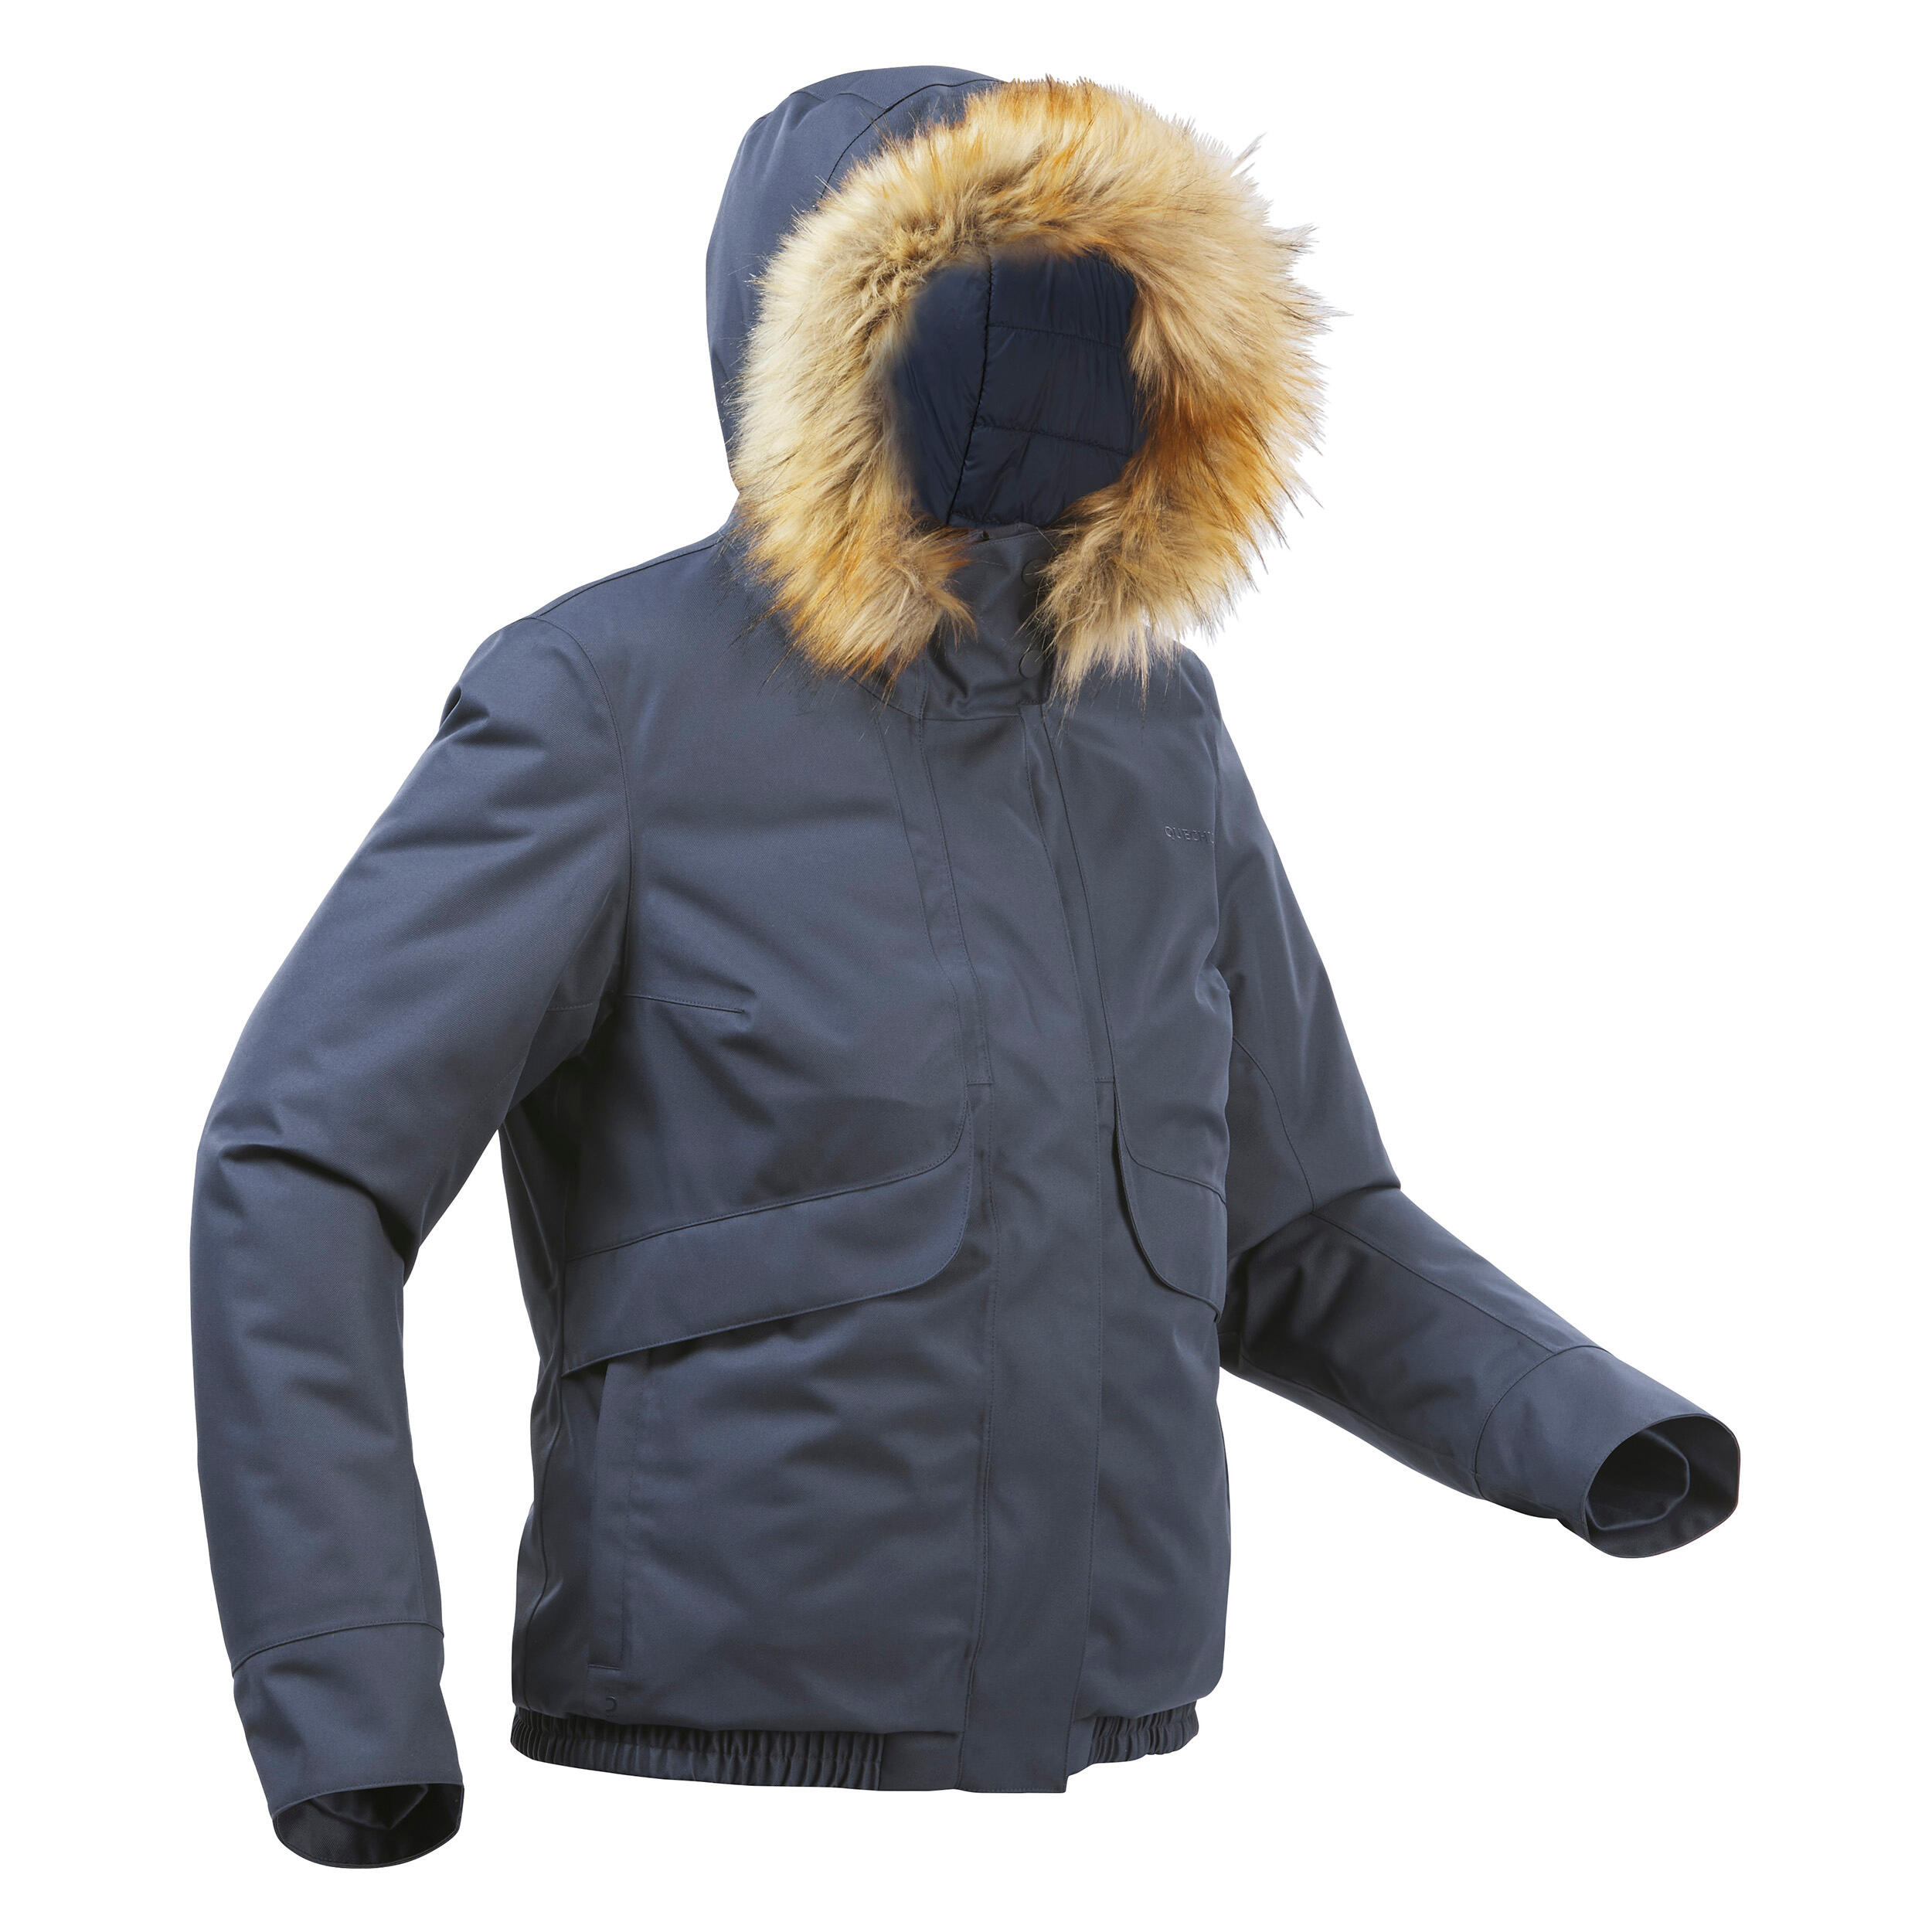 Women's Insulated Hiking Jackets